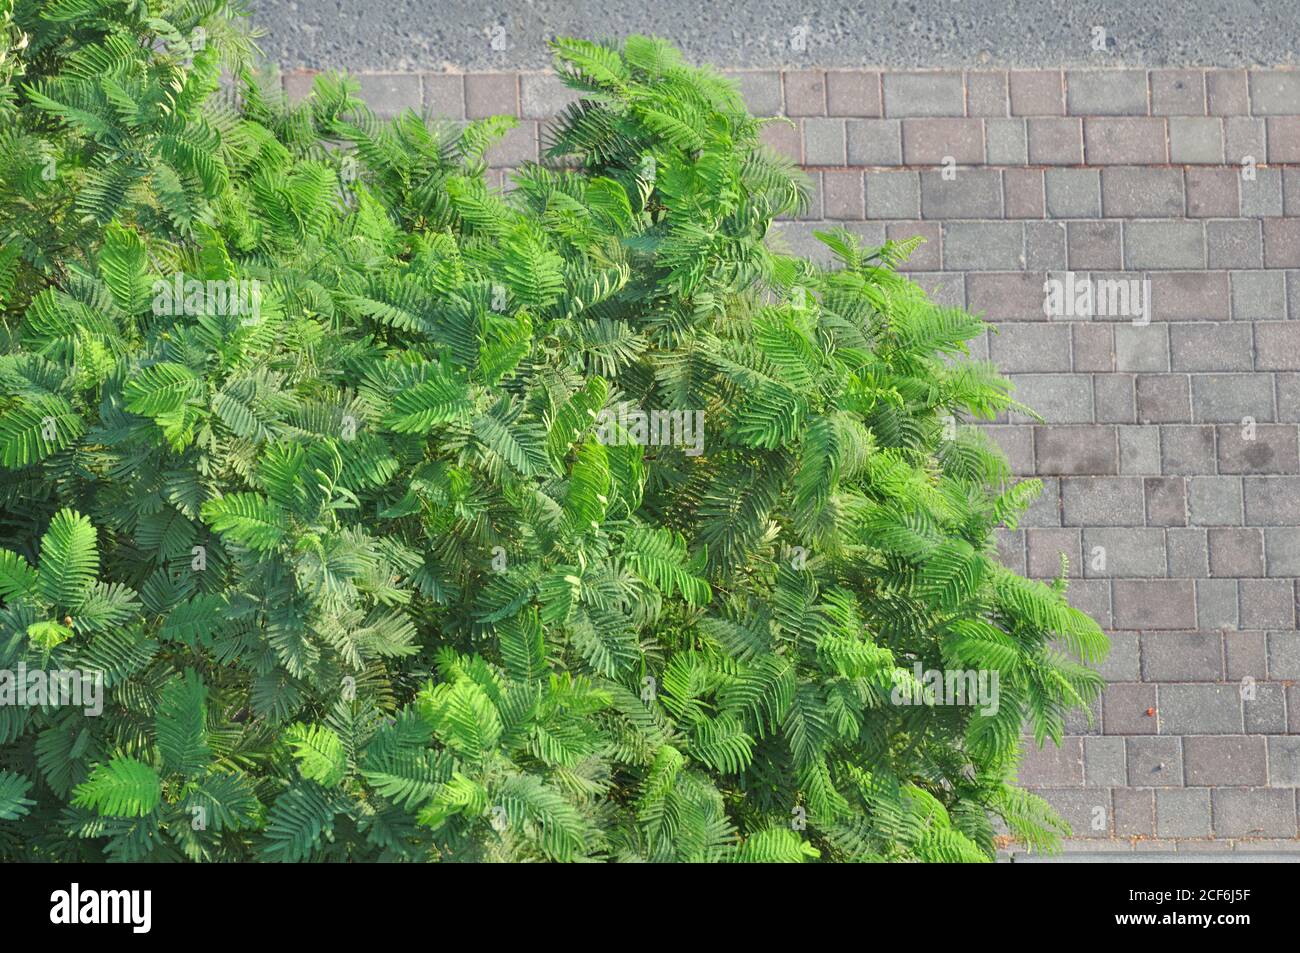 Urban jungle tree against concrete background. Windy, leafy, emerald and olive green tree colors. Nature vs man made designs. Stock Photo